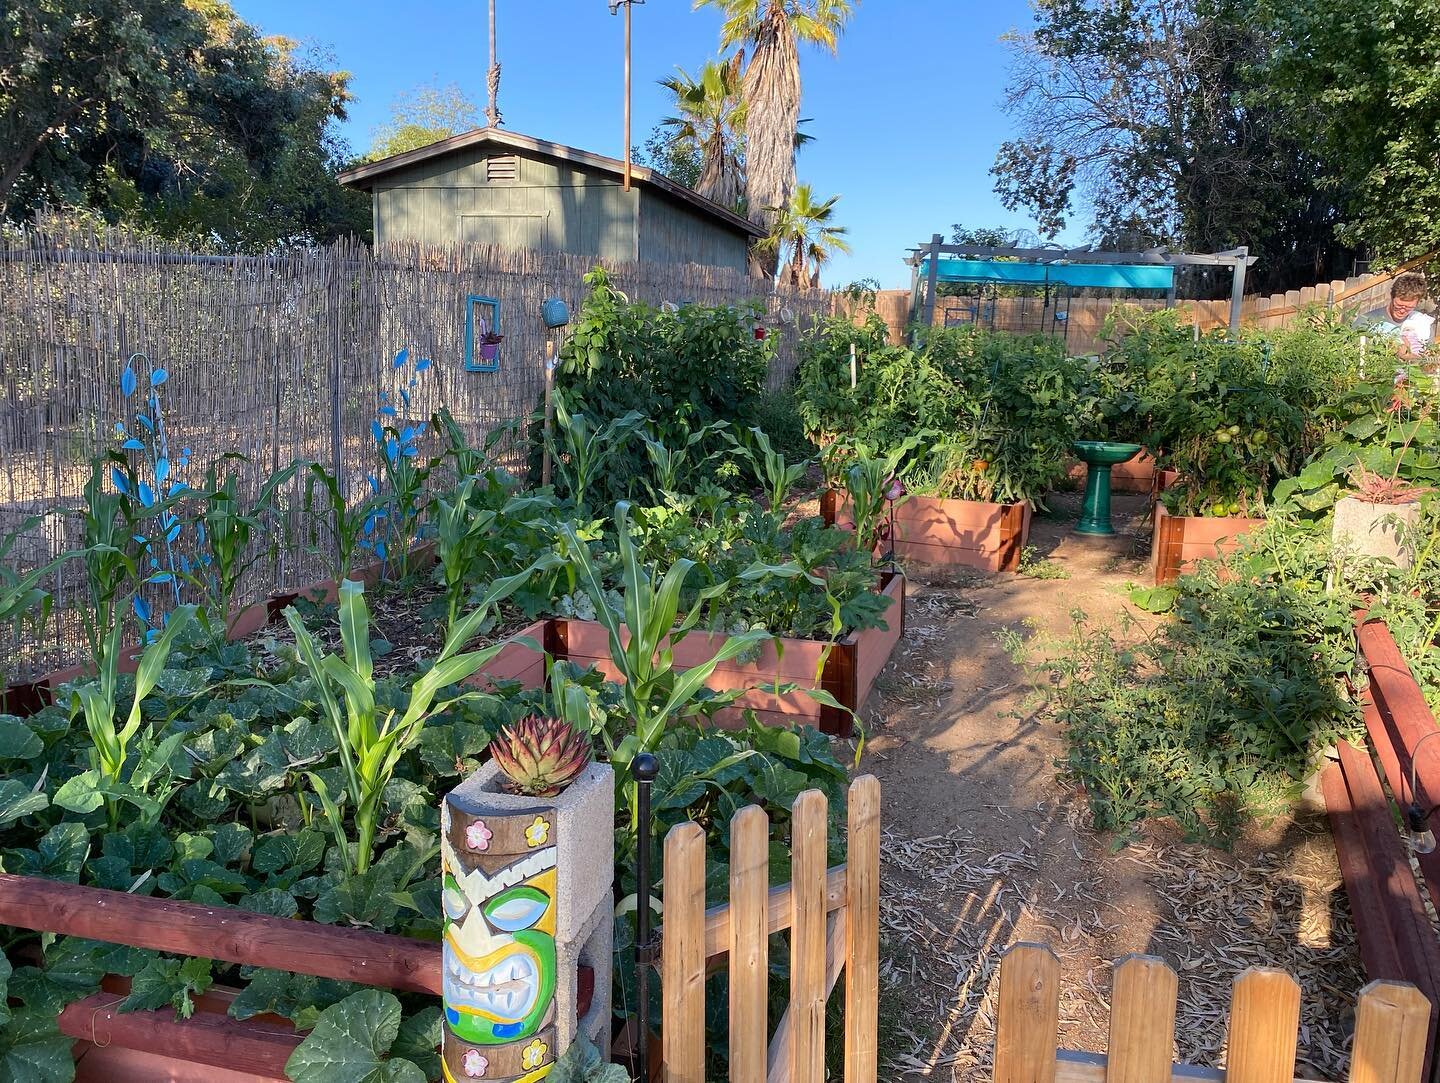 Our garden in full bloom! Tomatoes, peppers, eggplants, squash, cucumbers, berries, onions, potatoes, beets, okra, and more! 🍅🥒🌶🍆🥬🌽🧄🥔🫑 Also a few photos with our new baby girl 💕👶🏼
#backyardgarden #garden #dreamgarden #summergarden #homegr